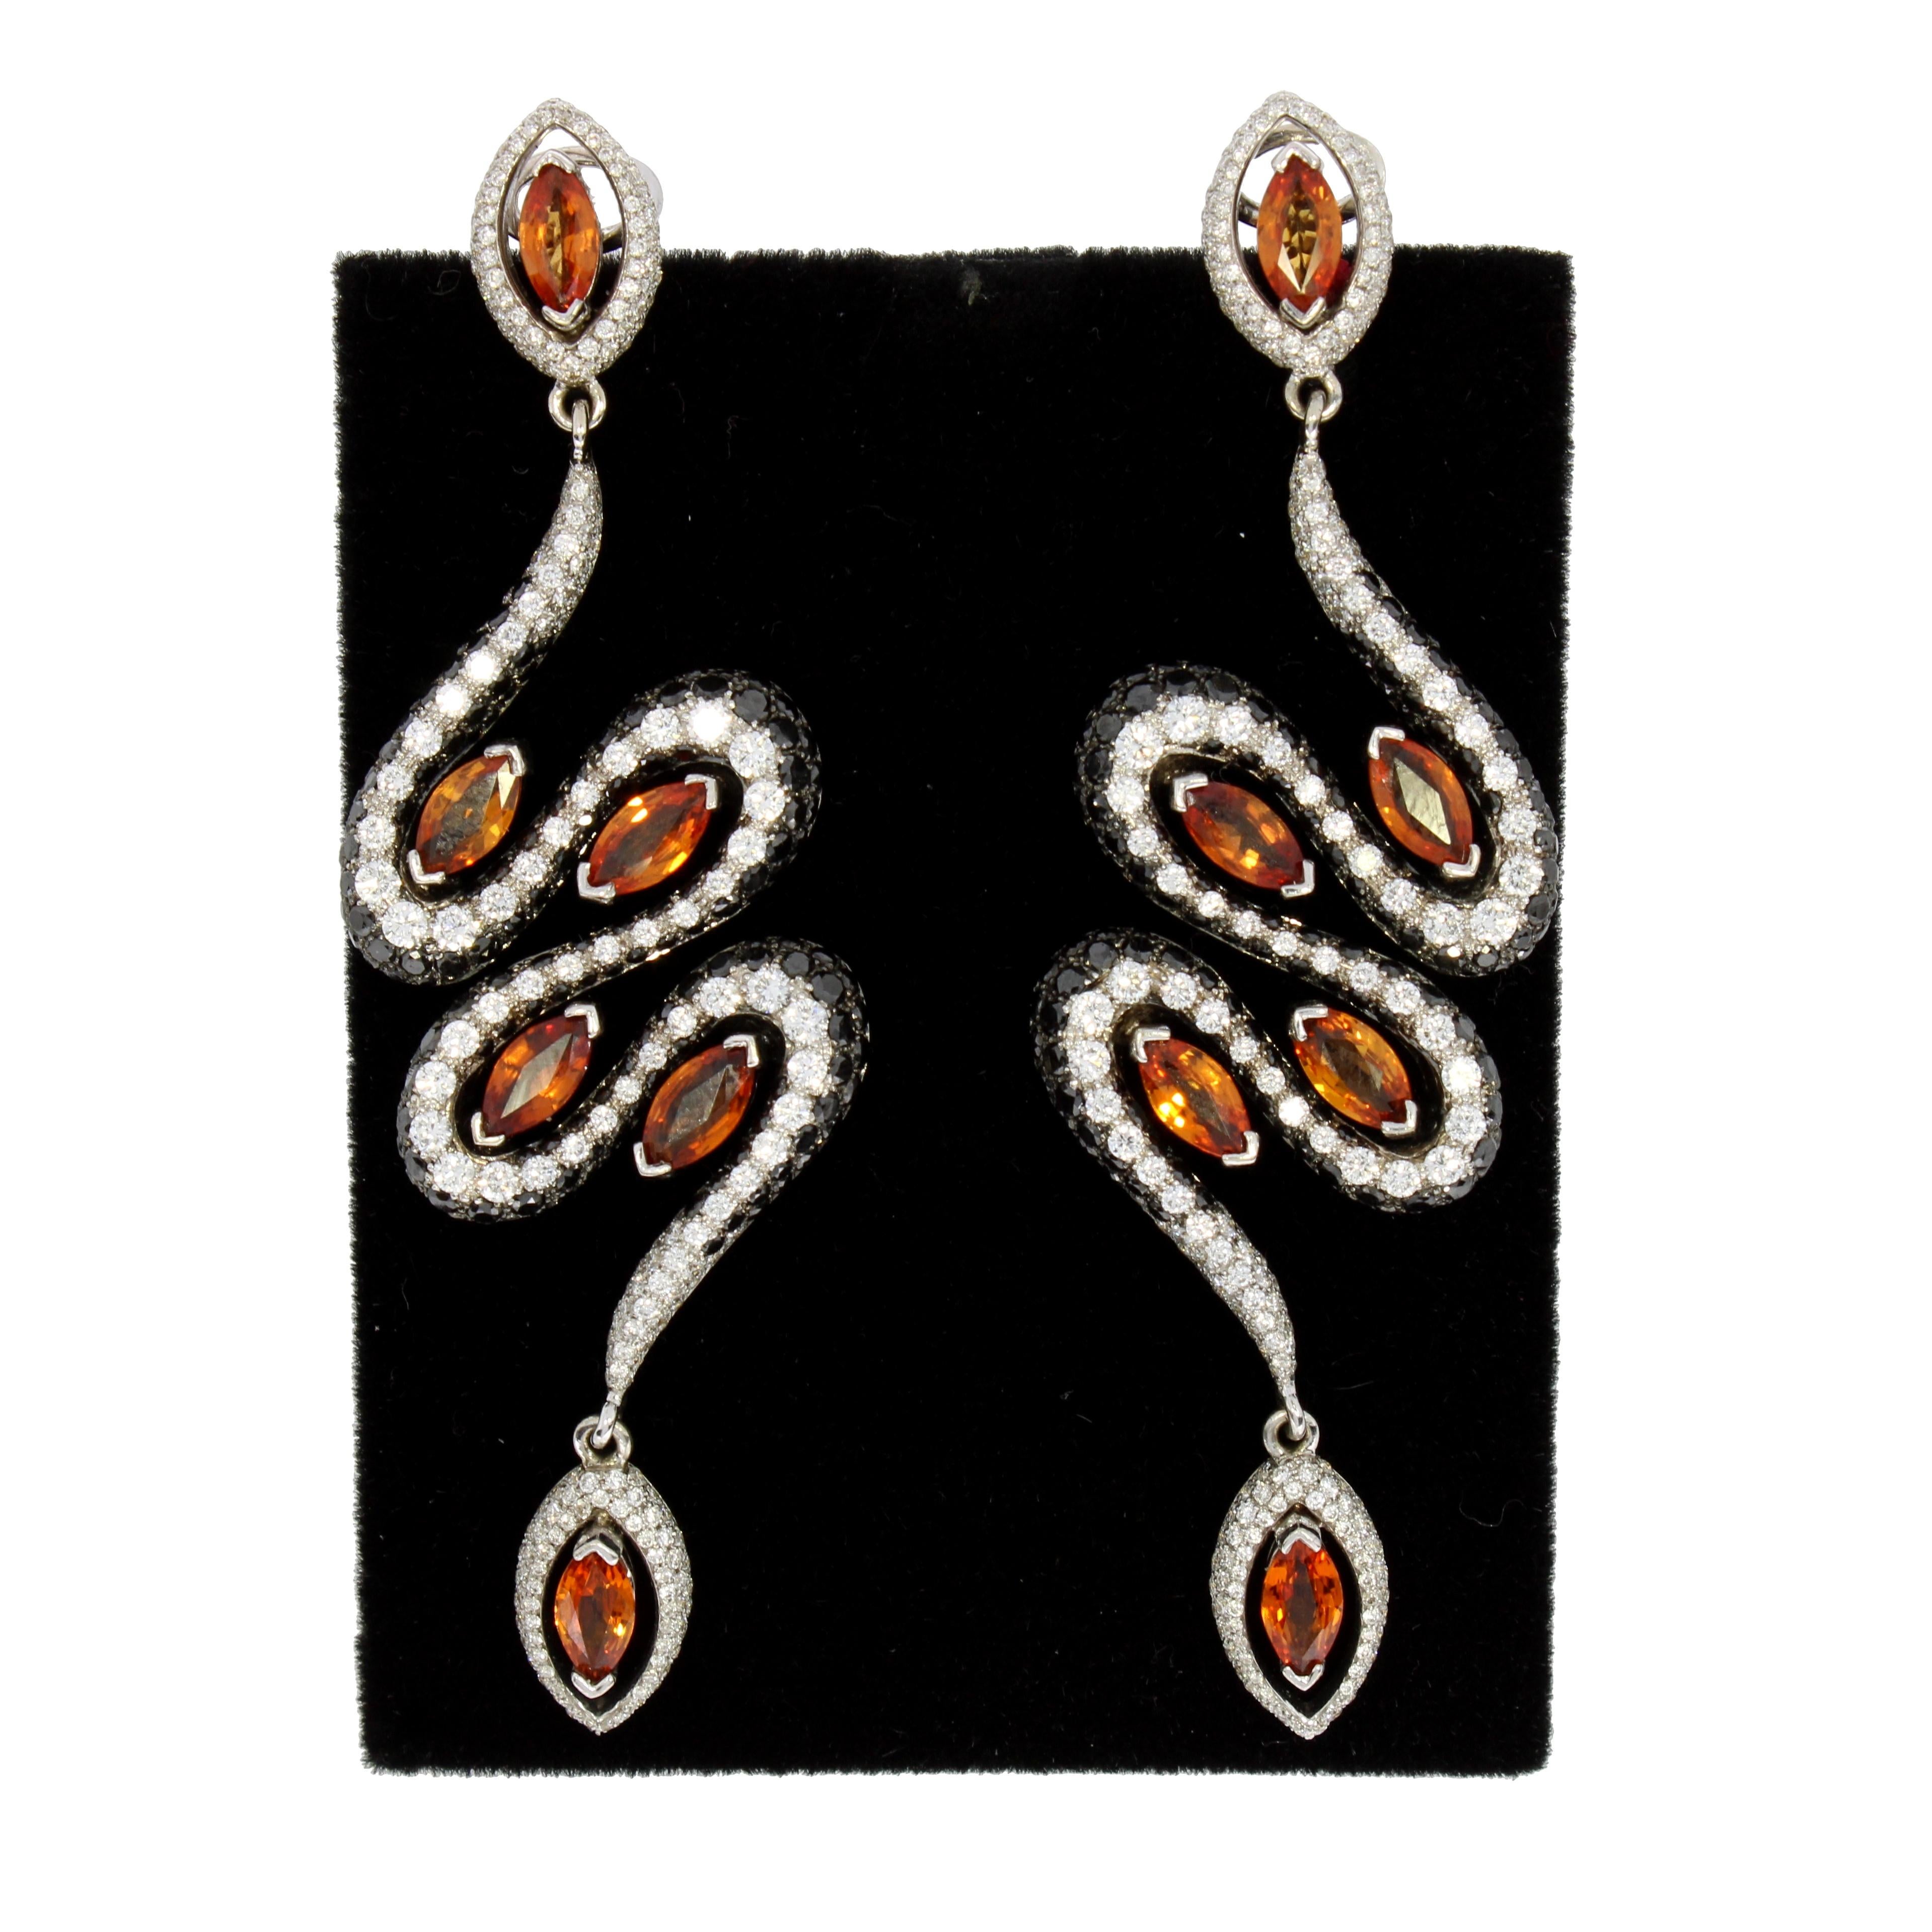 18 Karat White Gold Orange Sapphire and Diamond Signature Earrings by Niquesa In New Condition For Sale In London, GB